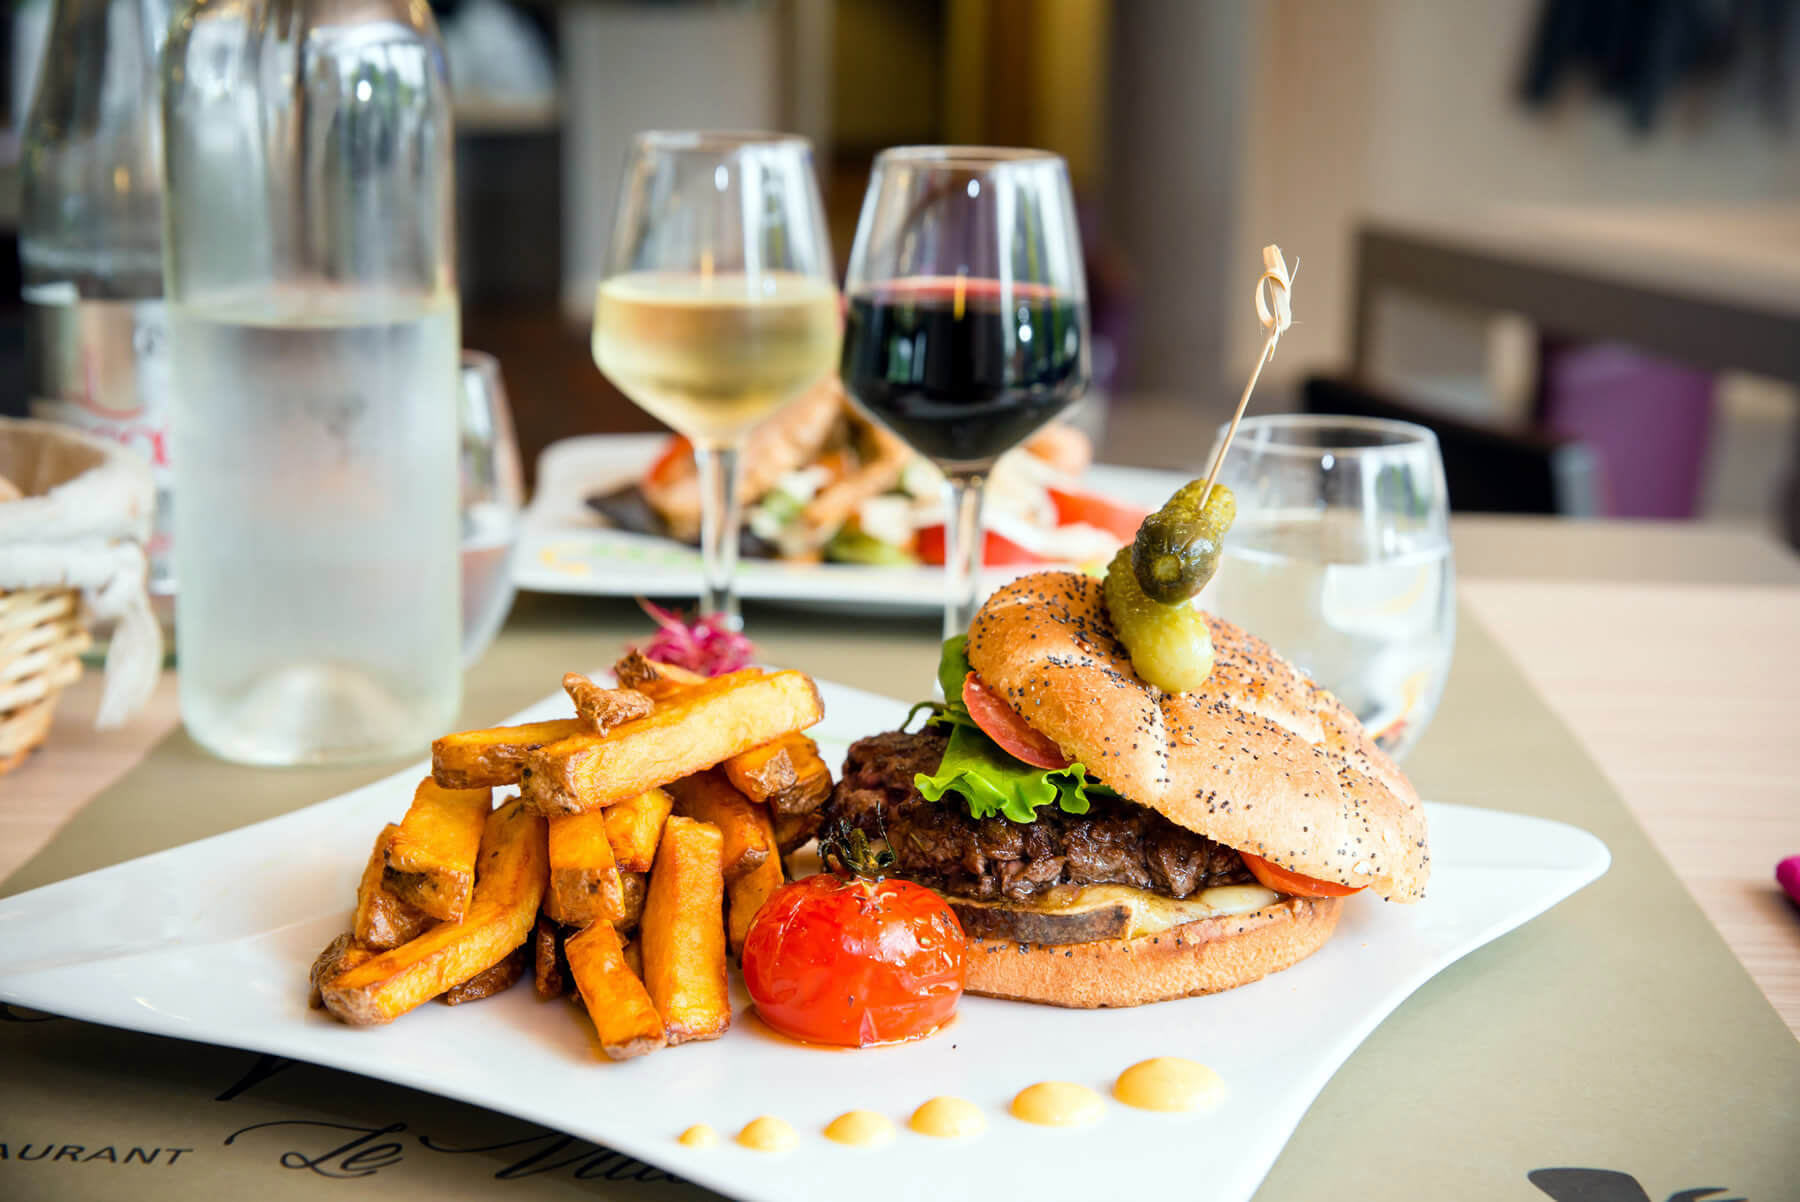 Our Burger and home fries at the Saint-Grégoire restaurant